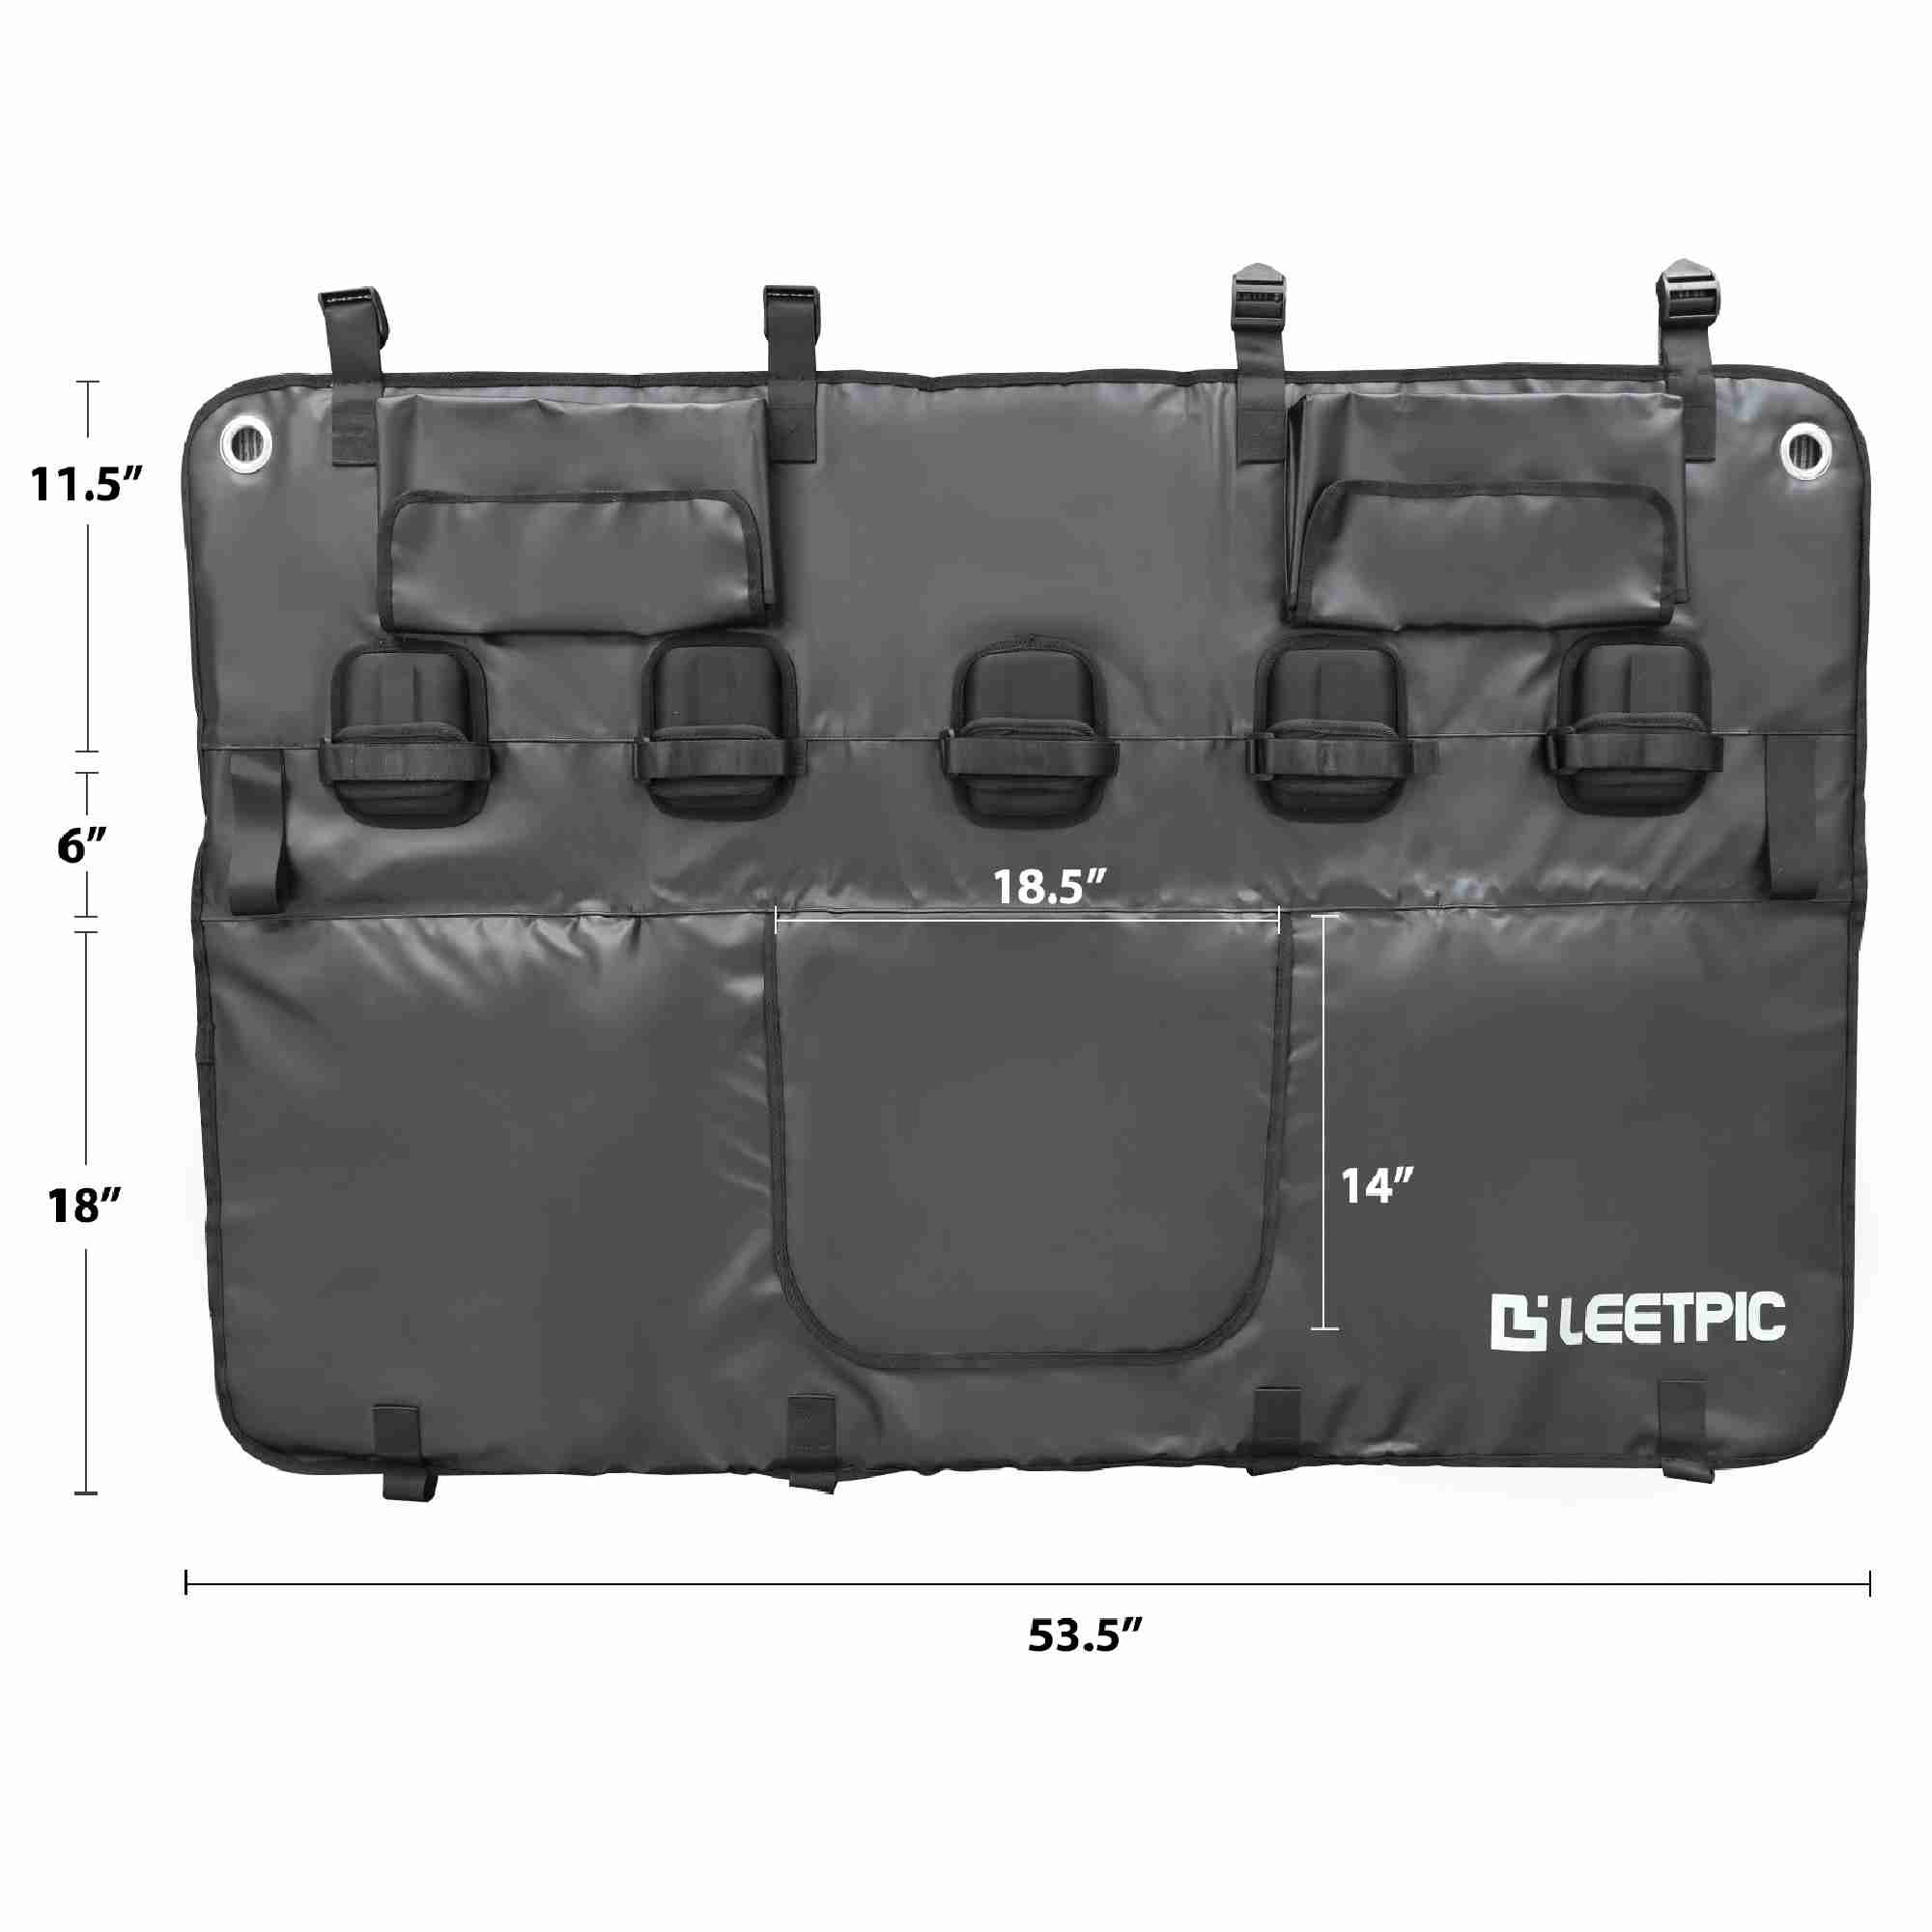 Tailgate-Bike-Pad with discount code